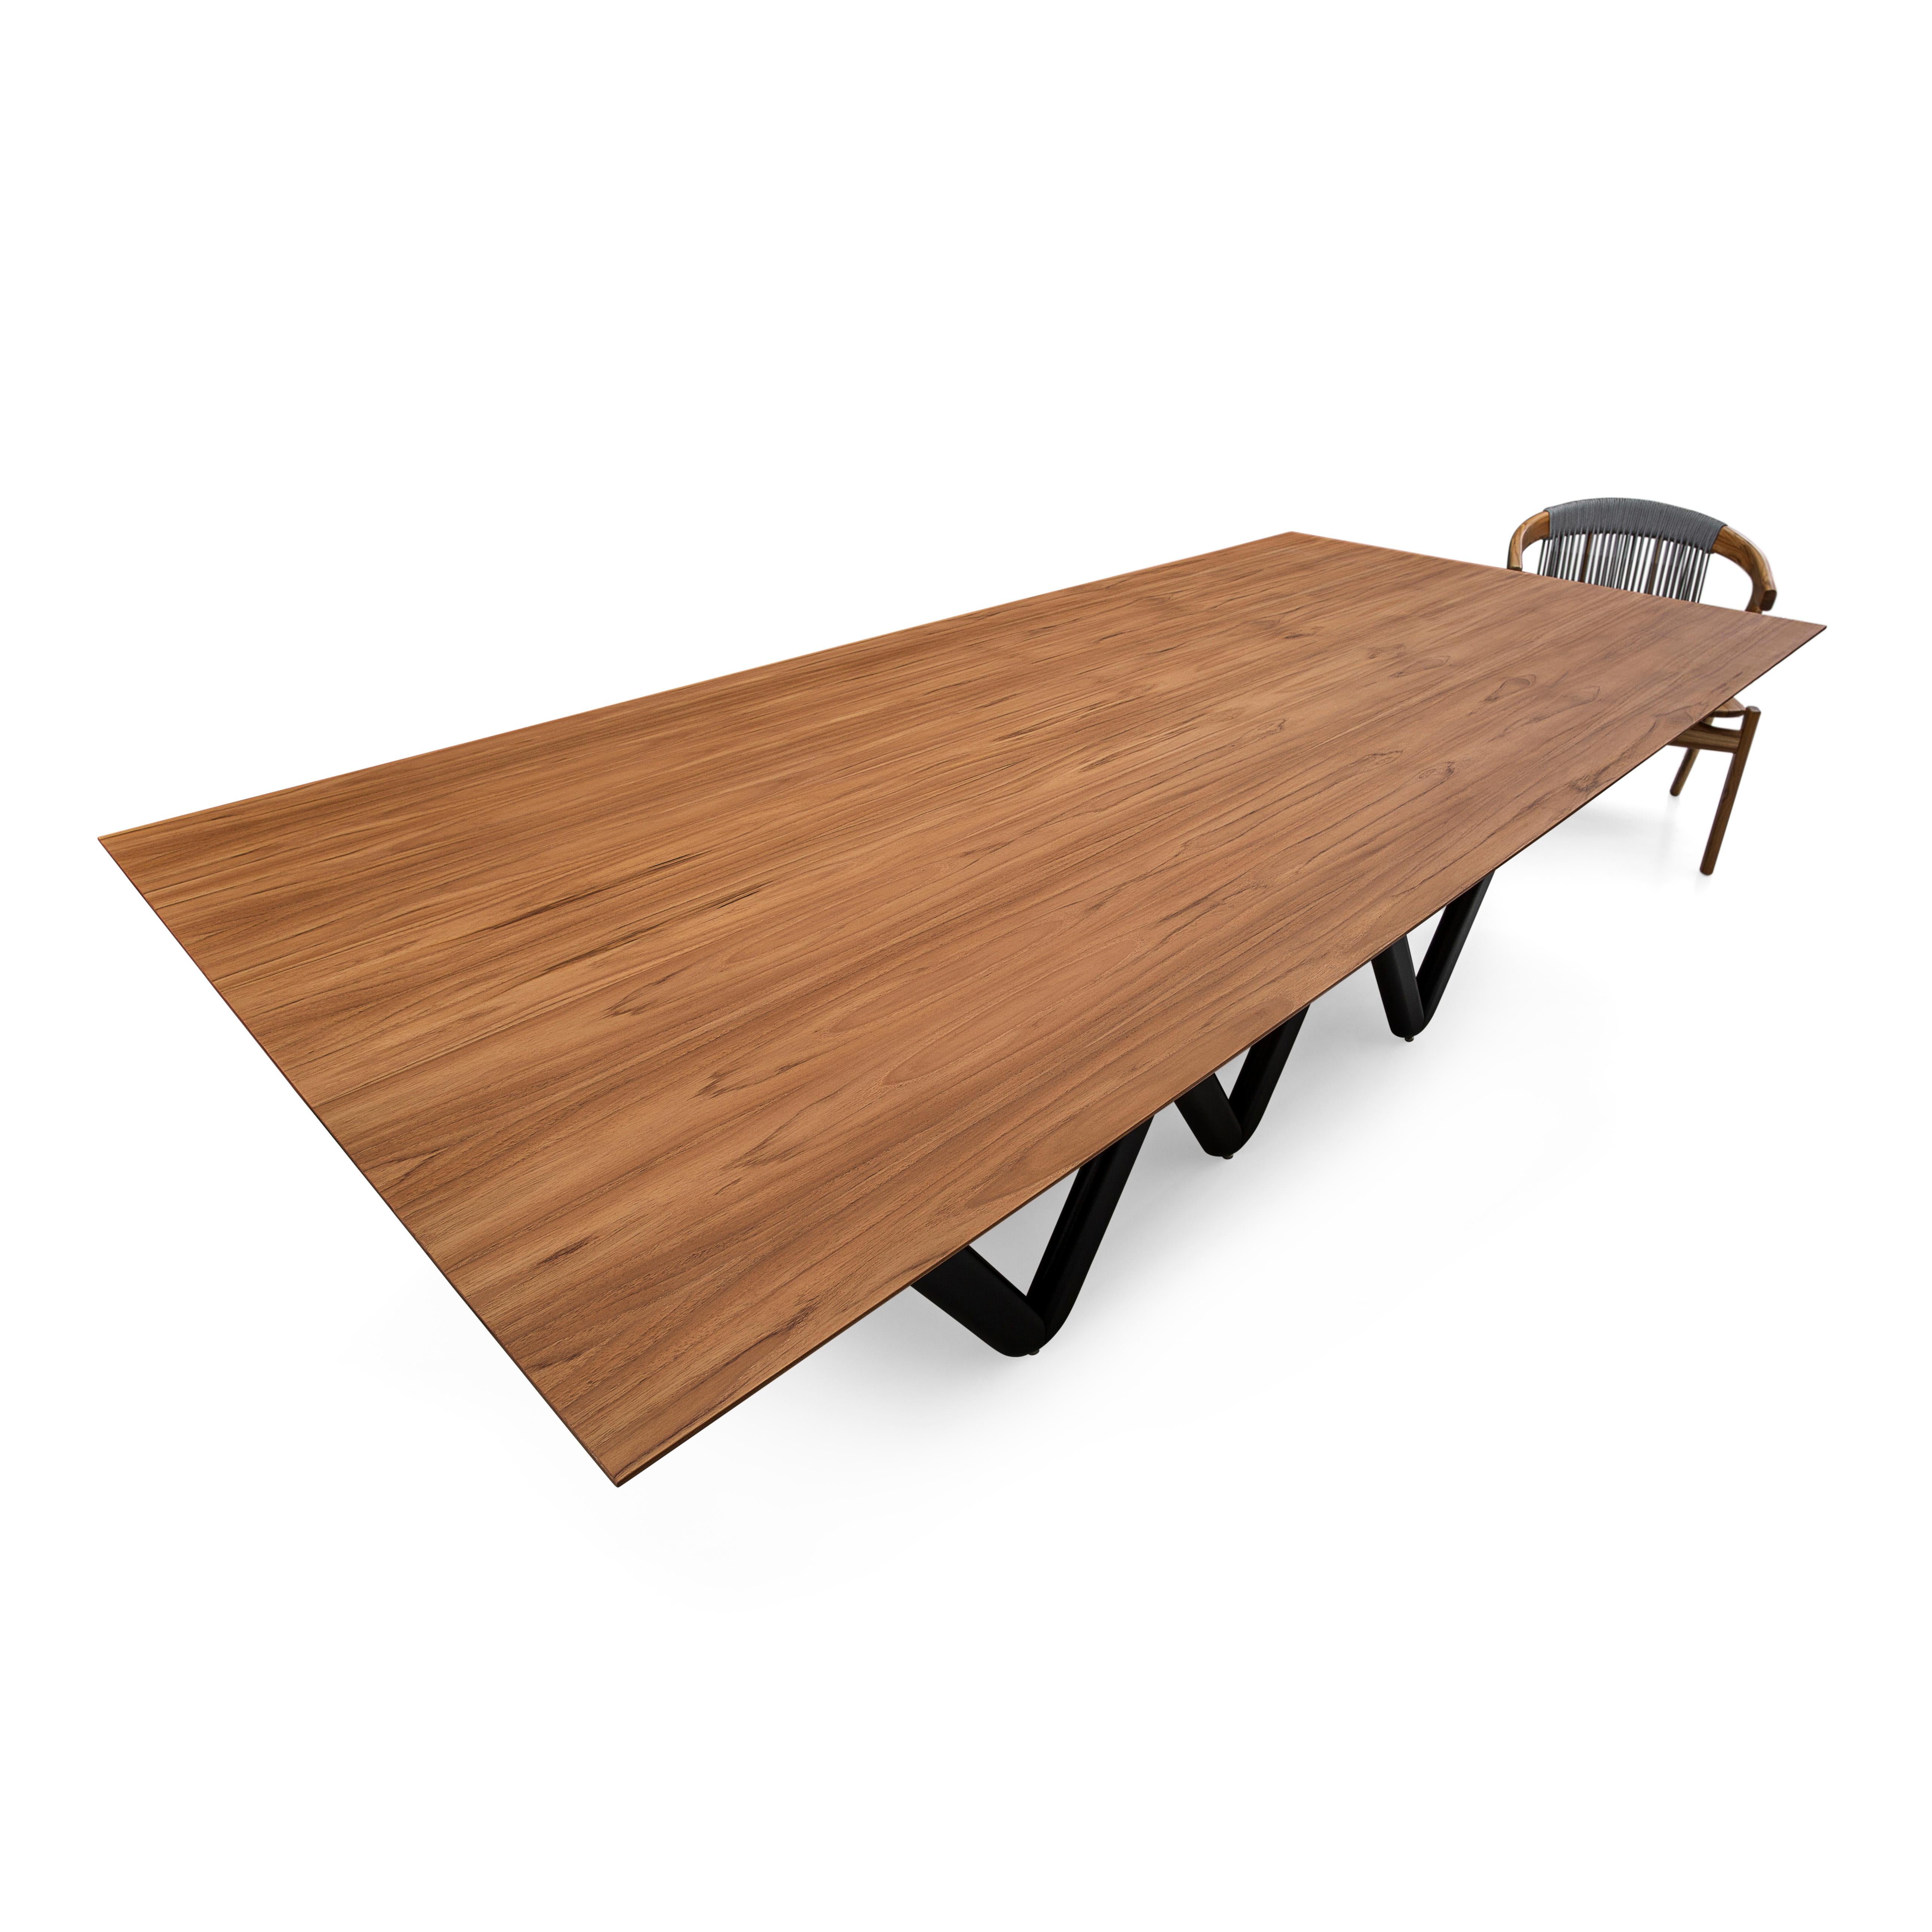 Contemporary Dablio Dining Table with a Teak Wood Veneered Table Top and Black Base 98'' For Sale